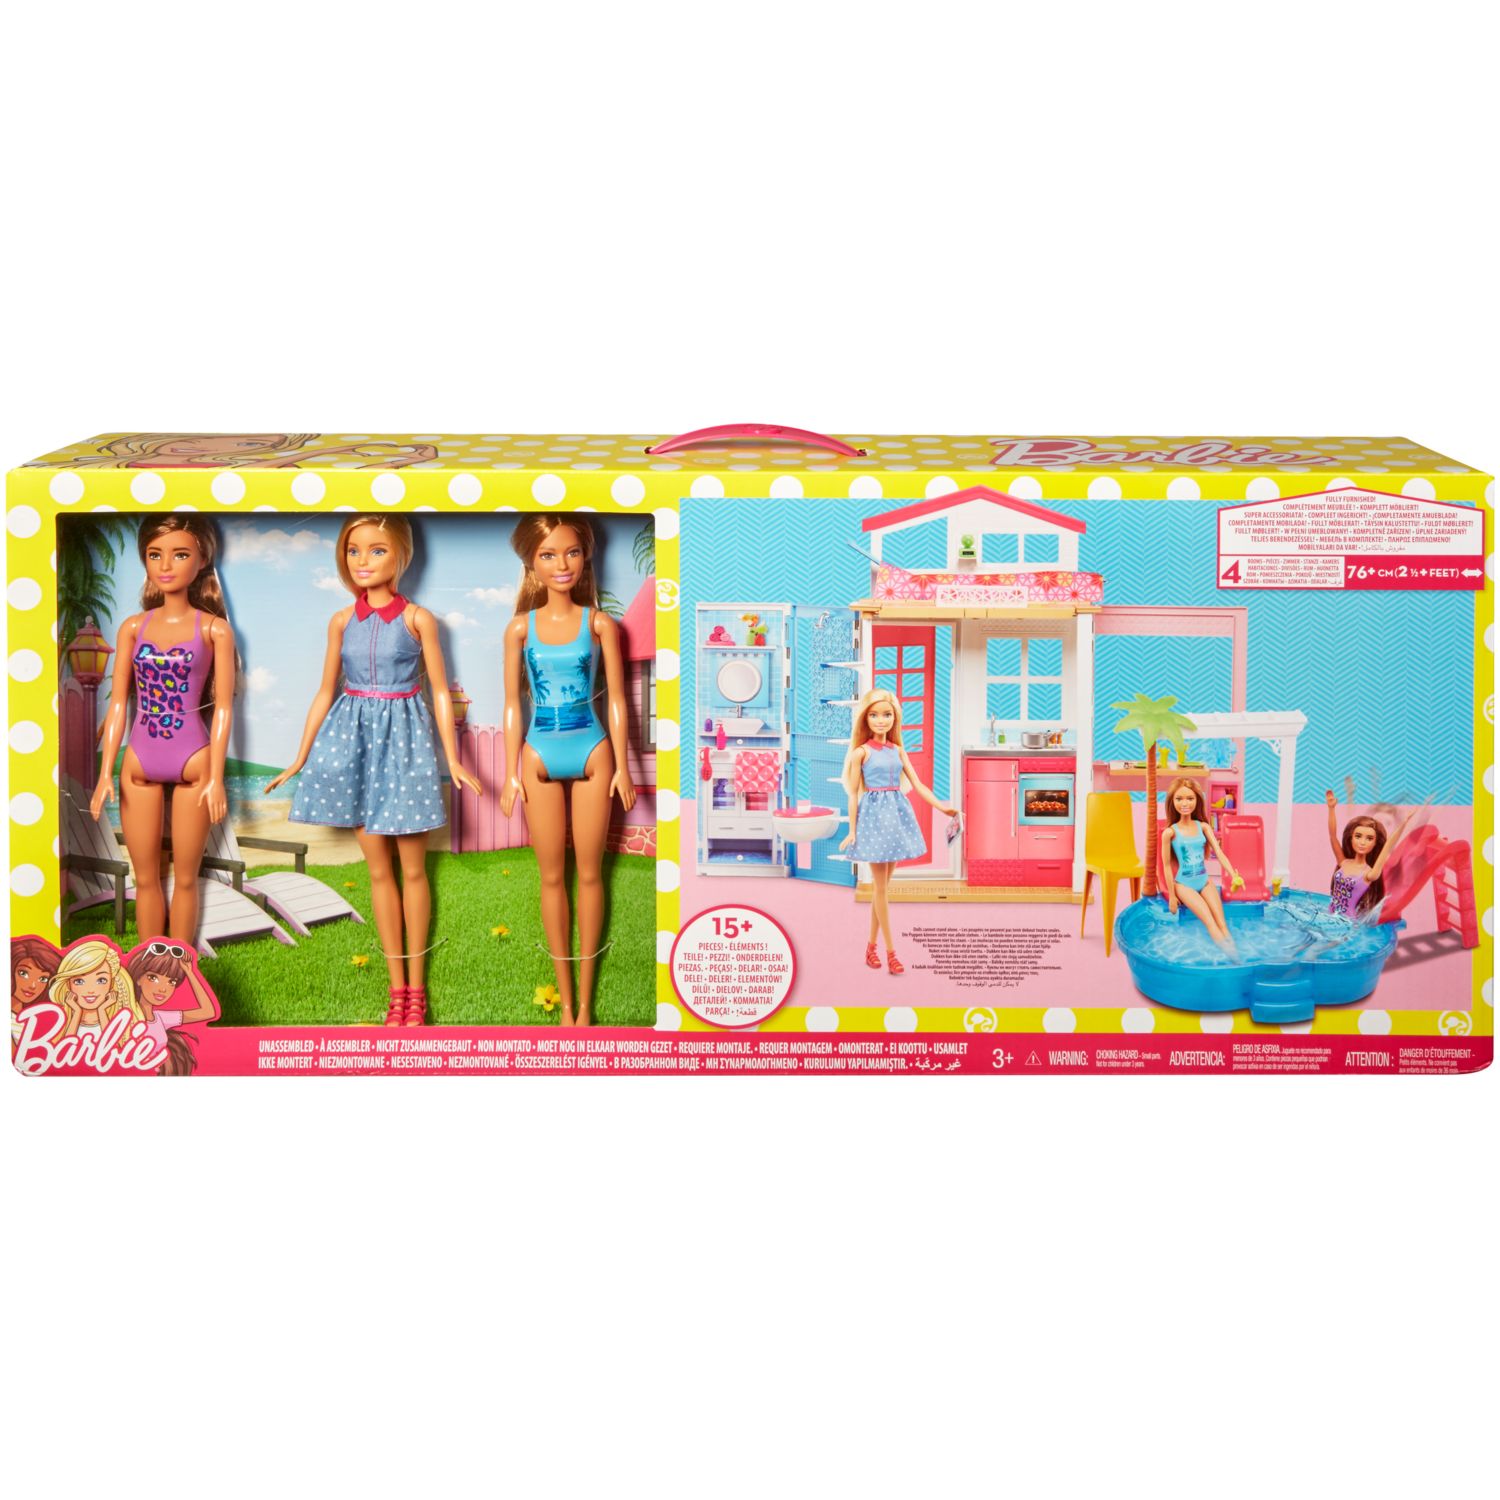 barbie home set with 3 dolls and pool